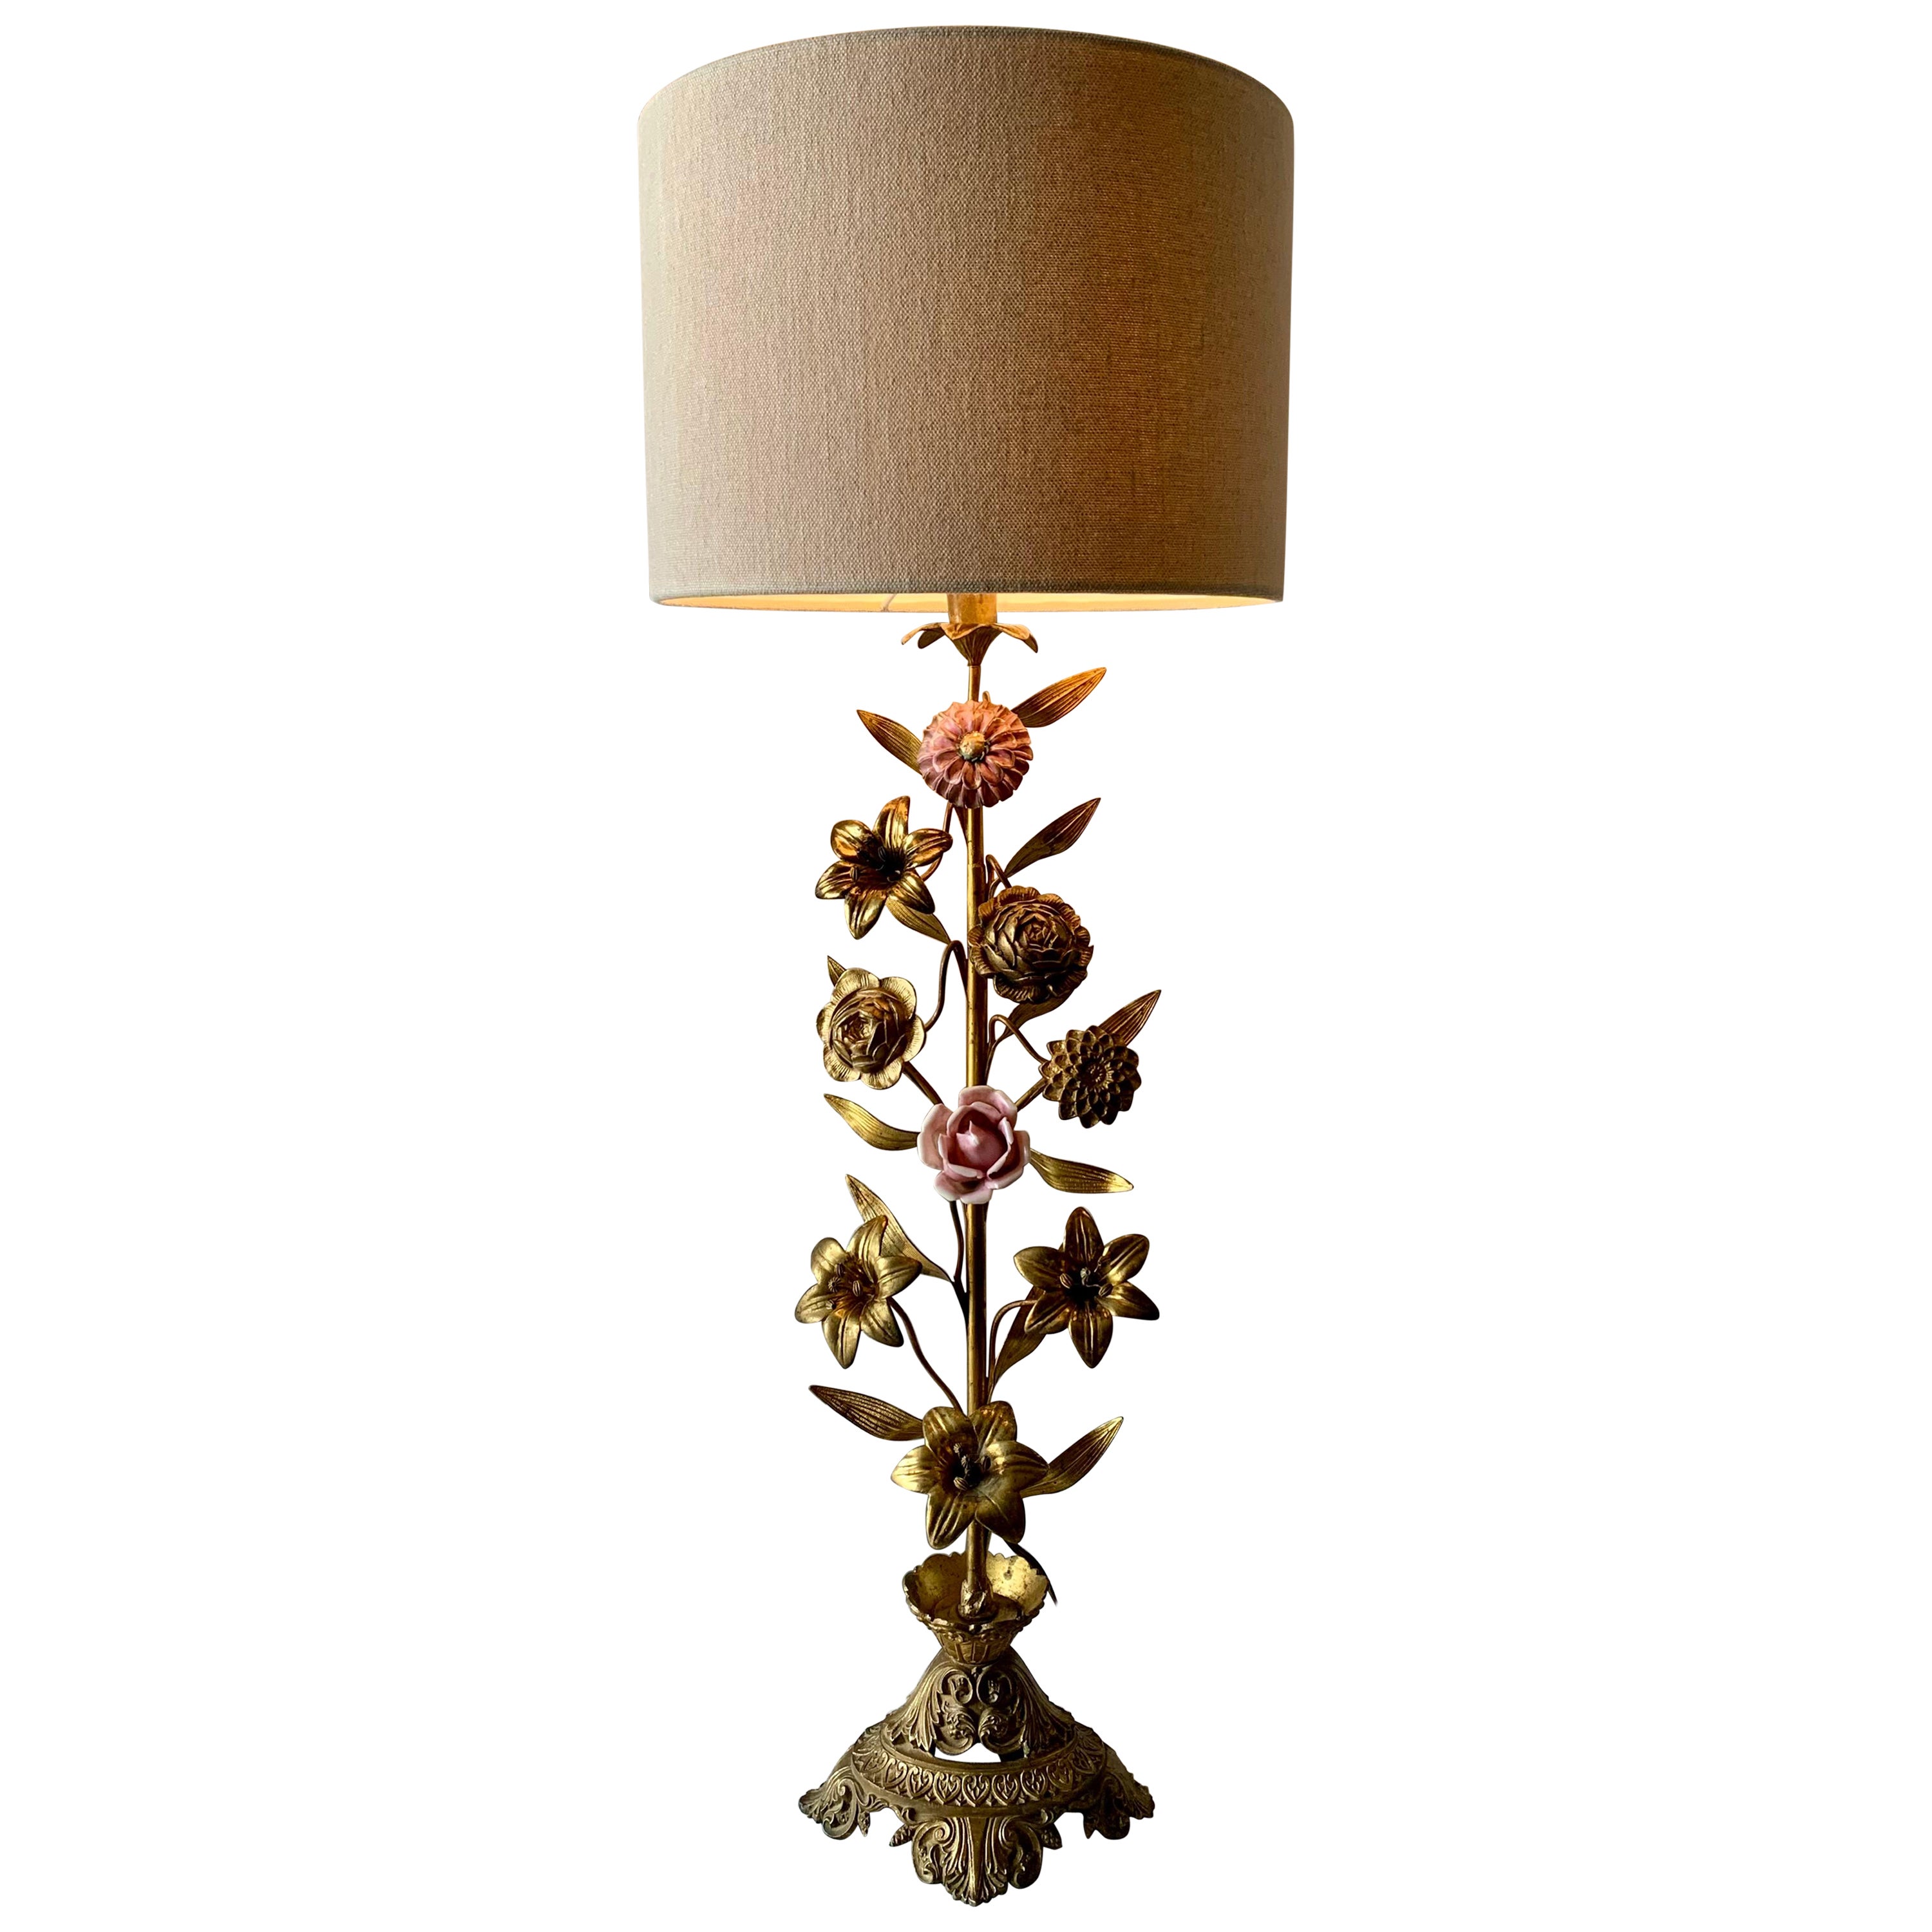 French Church Candelabra Table Lamp